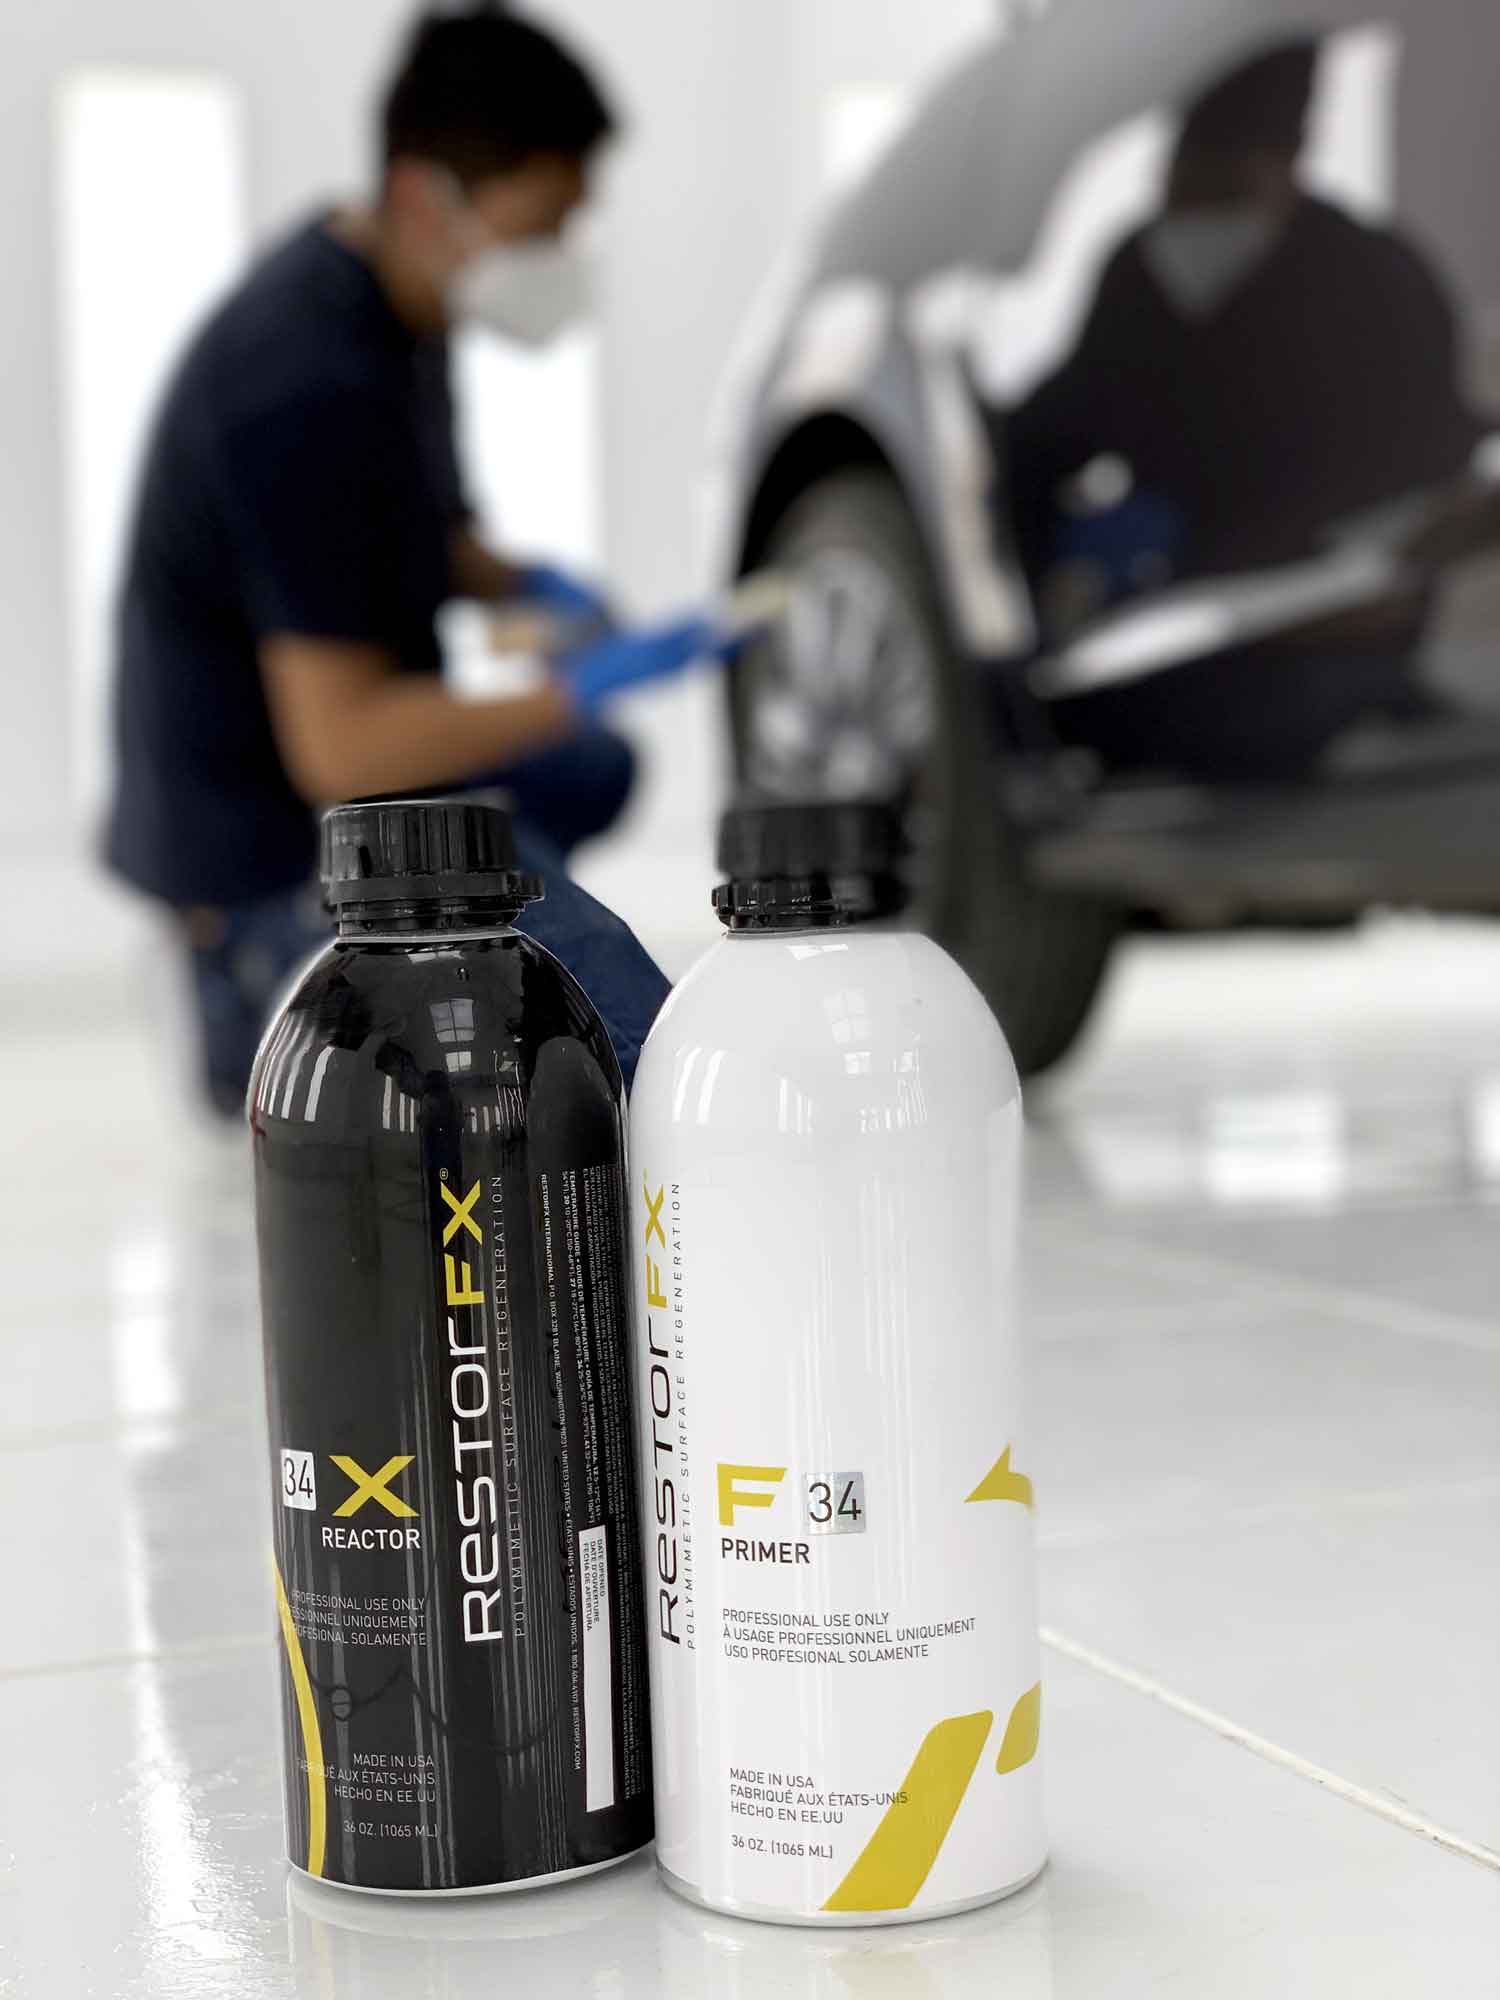 Technician applying RestorFX product onto vehicle's surface during paint restoration process